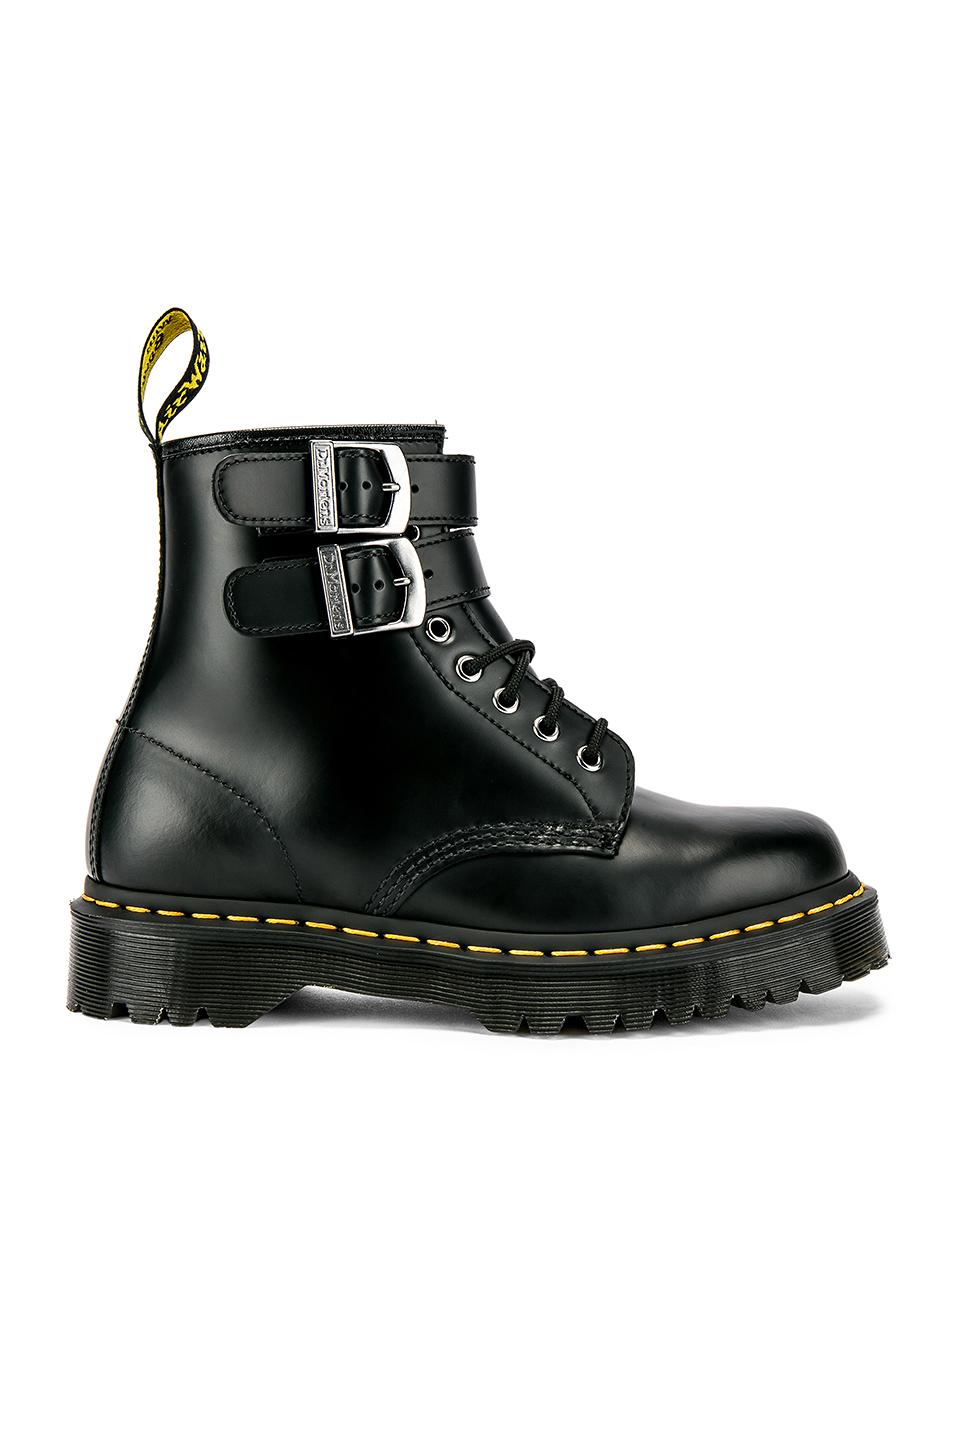 Dr. Martens Leather 1460 Alternative Fusion Boot in Black for Men - Lyst